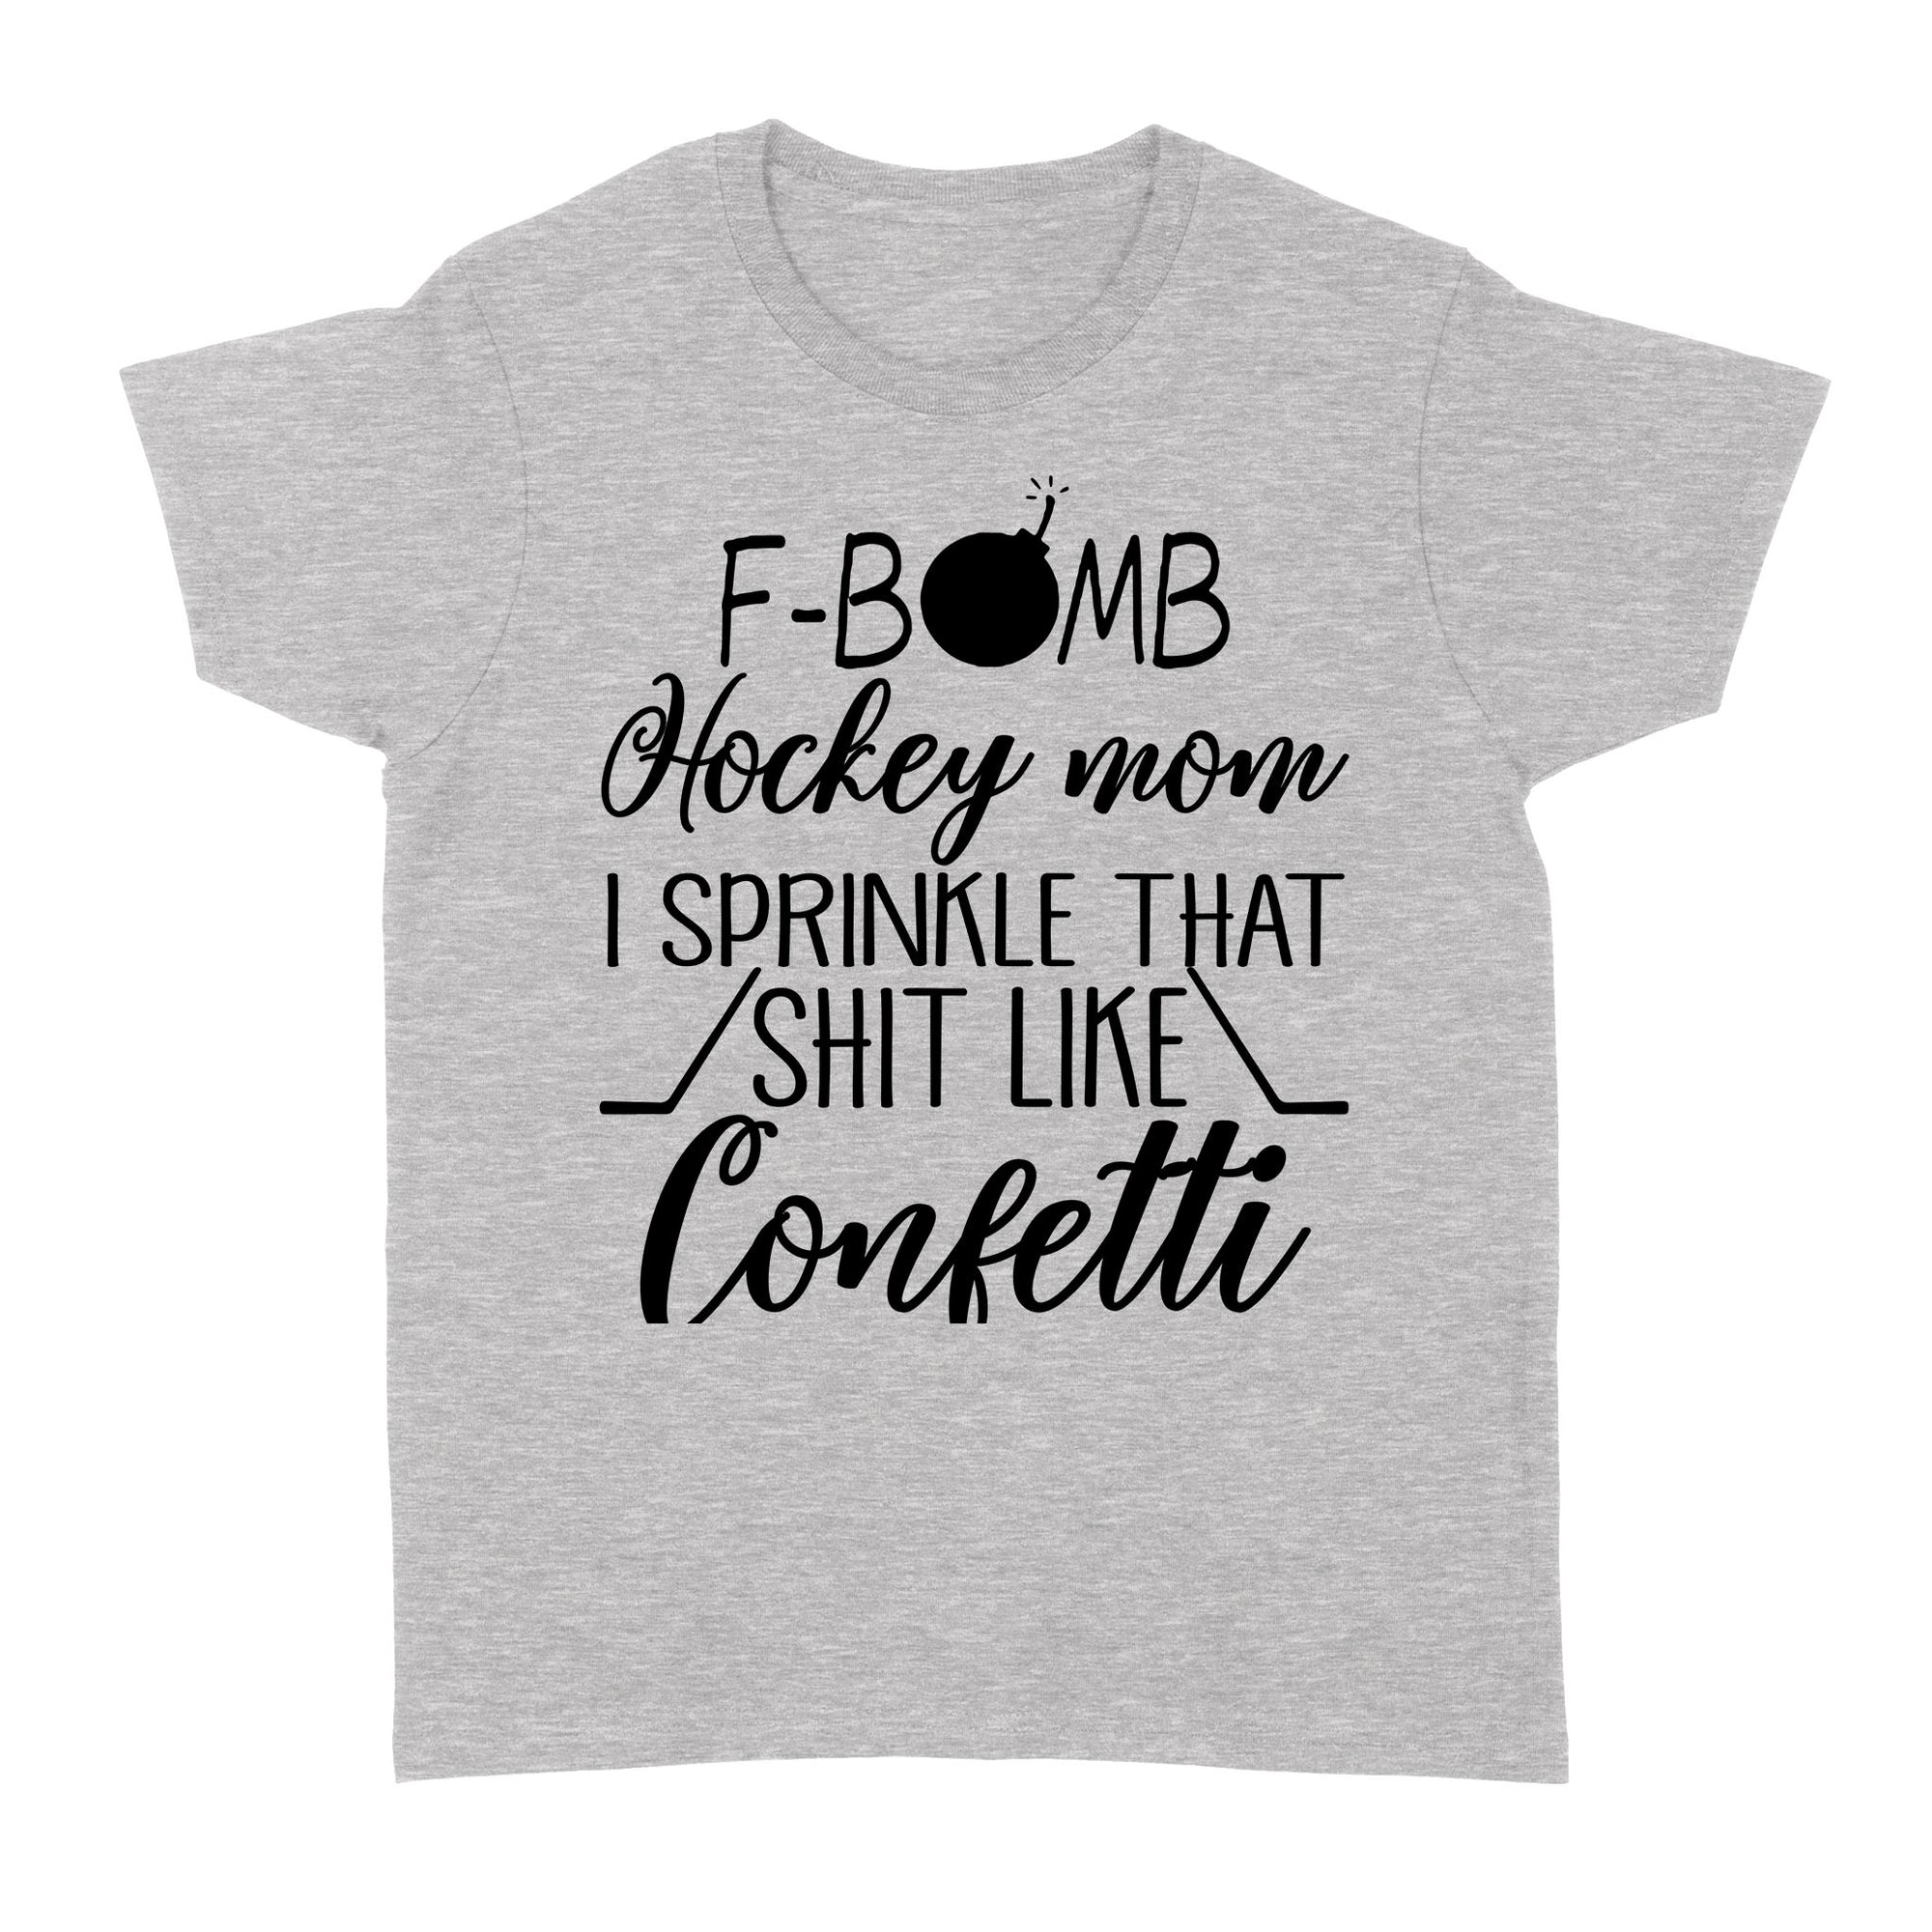 F Bomb Hockey Mom I Sprinkle That Shit Like Confetti Funny Gift ideas for Mom Mother Her Wife w - Standard Women's T-shirt